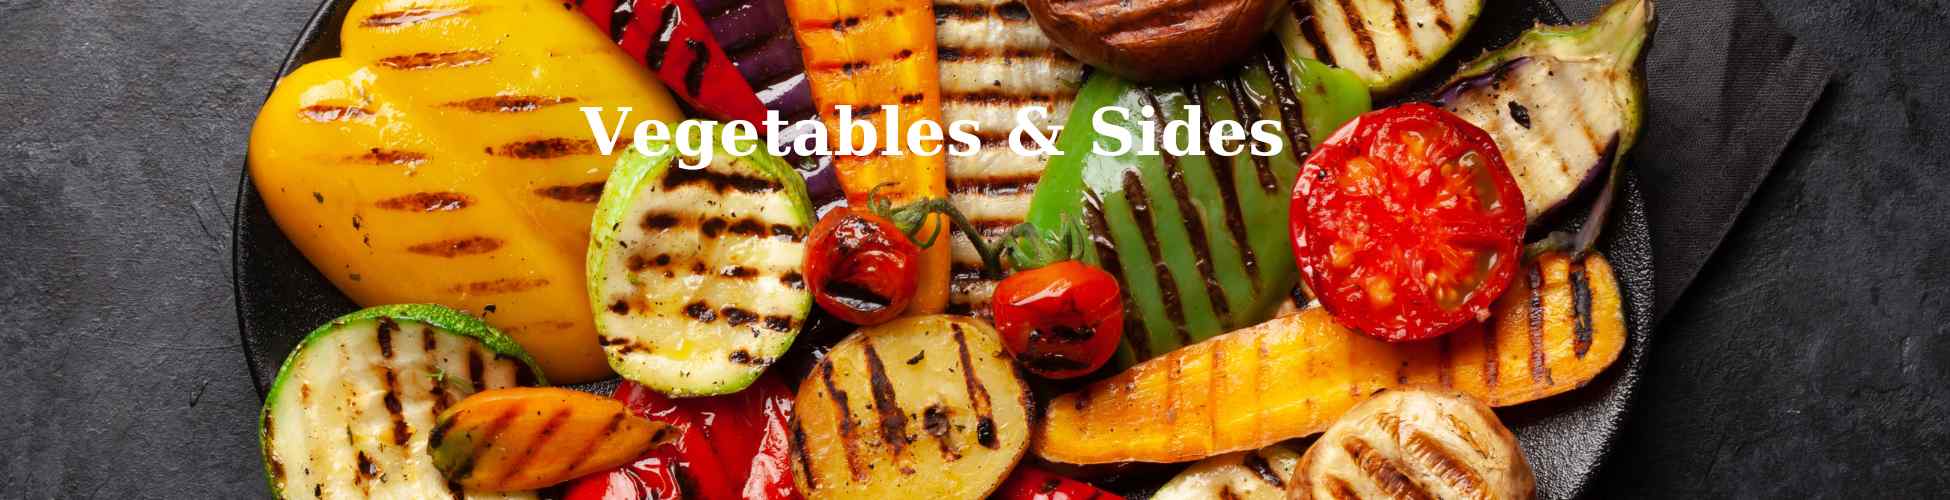 Colorful sliced and whole vegetables with grill marks